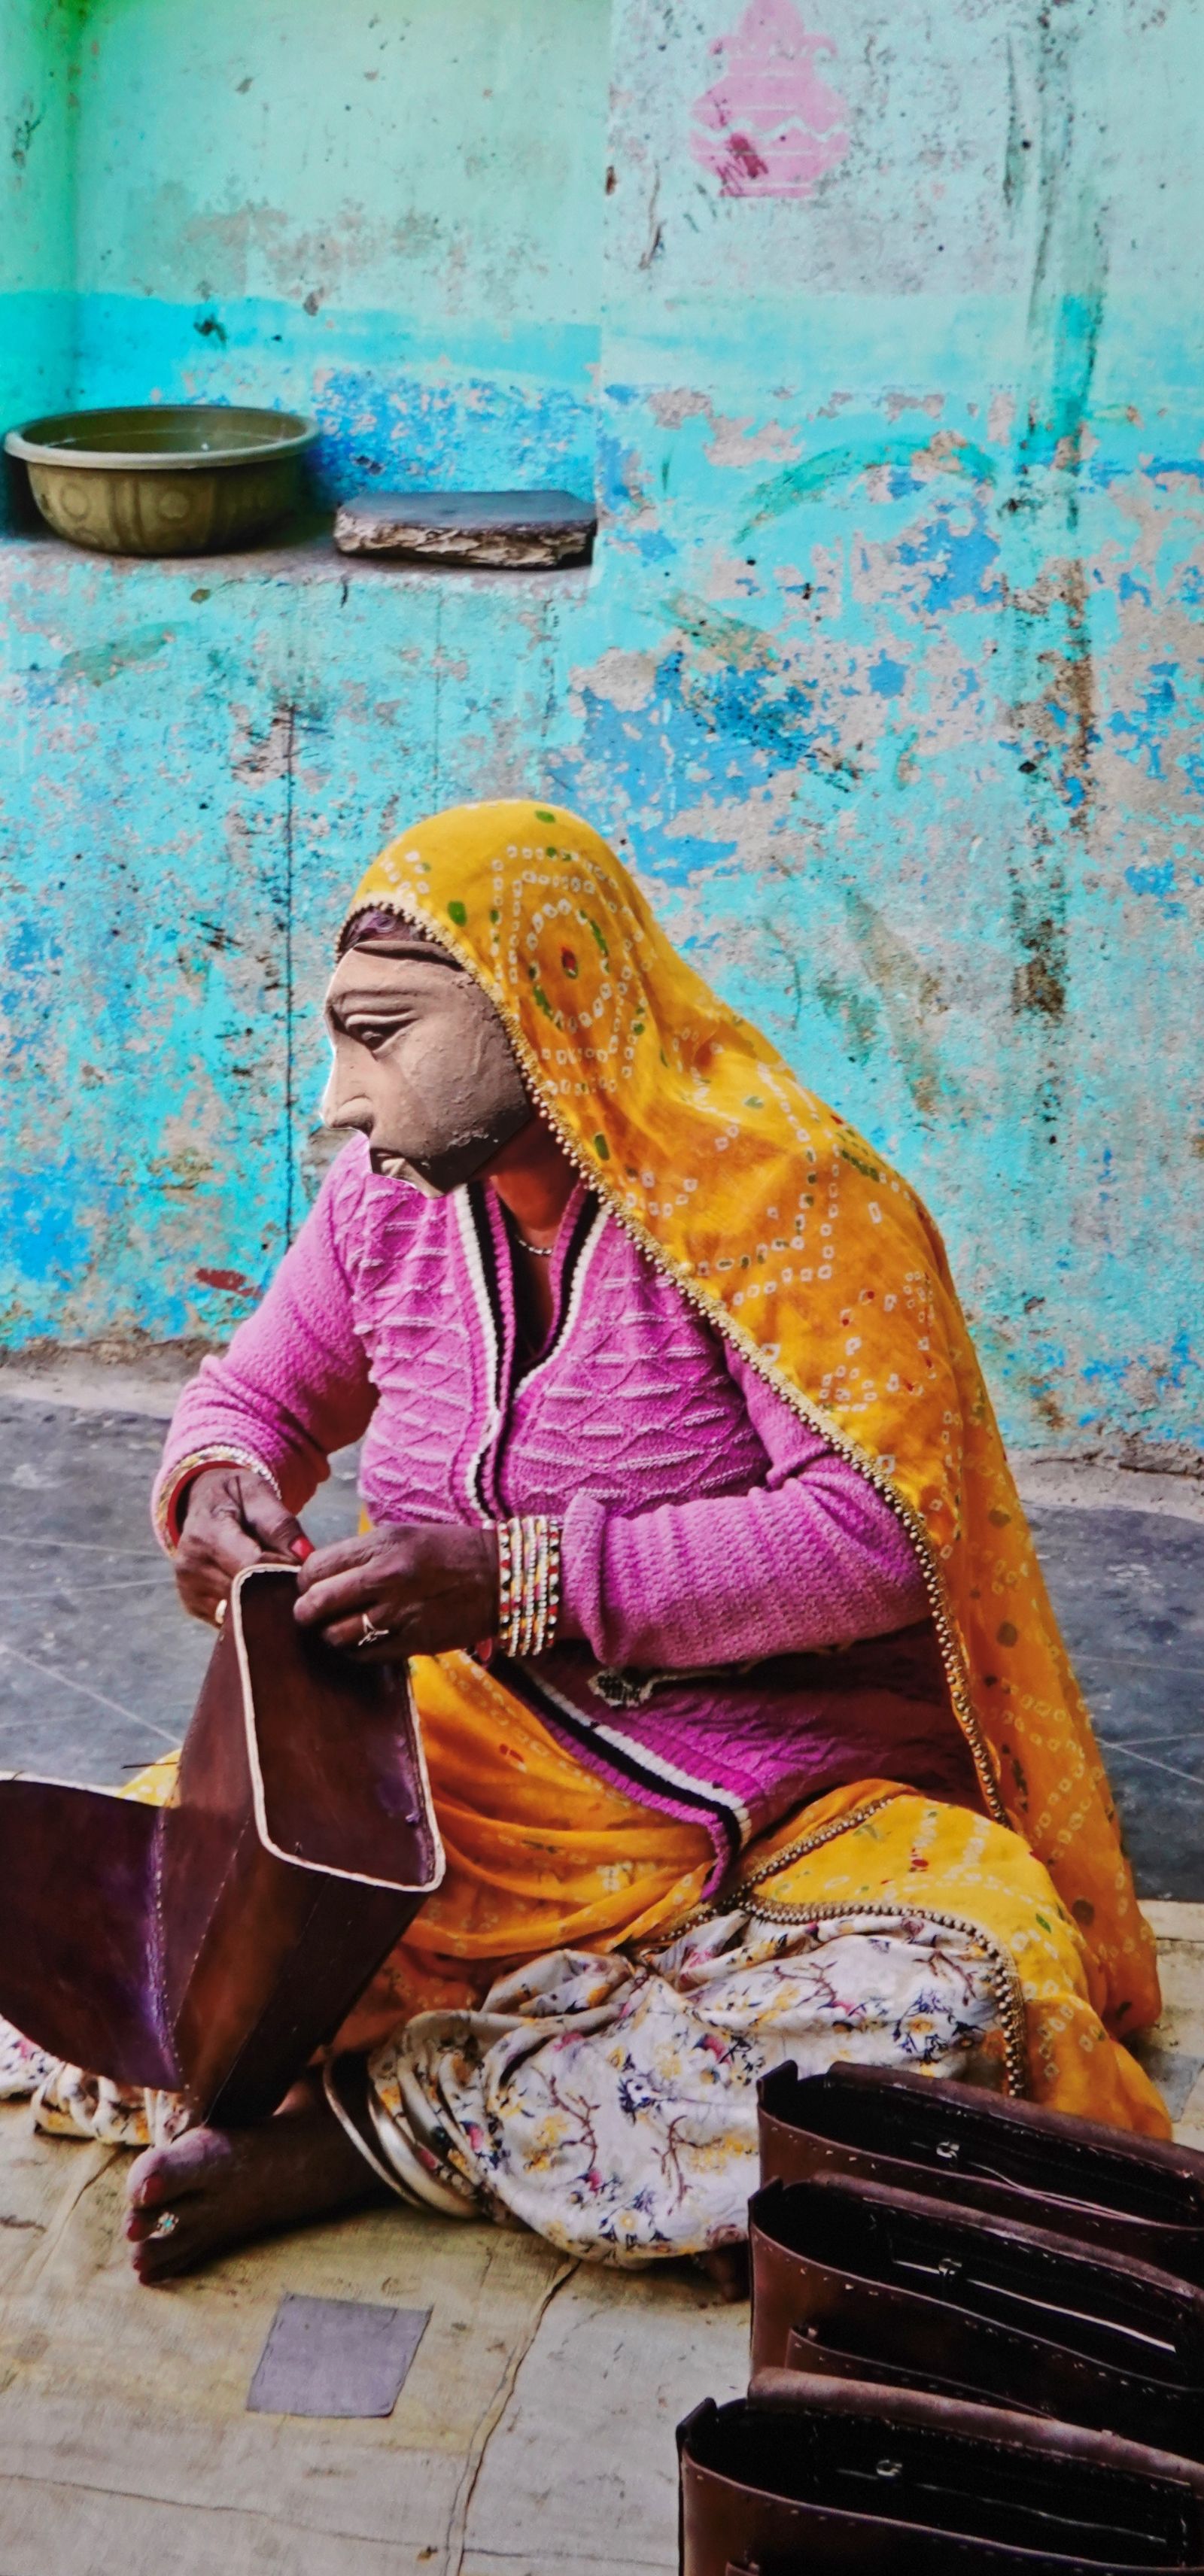 © Elana Sigal - Image from the Hidden Beauty * Women Of India photography project